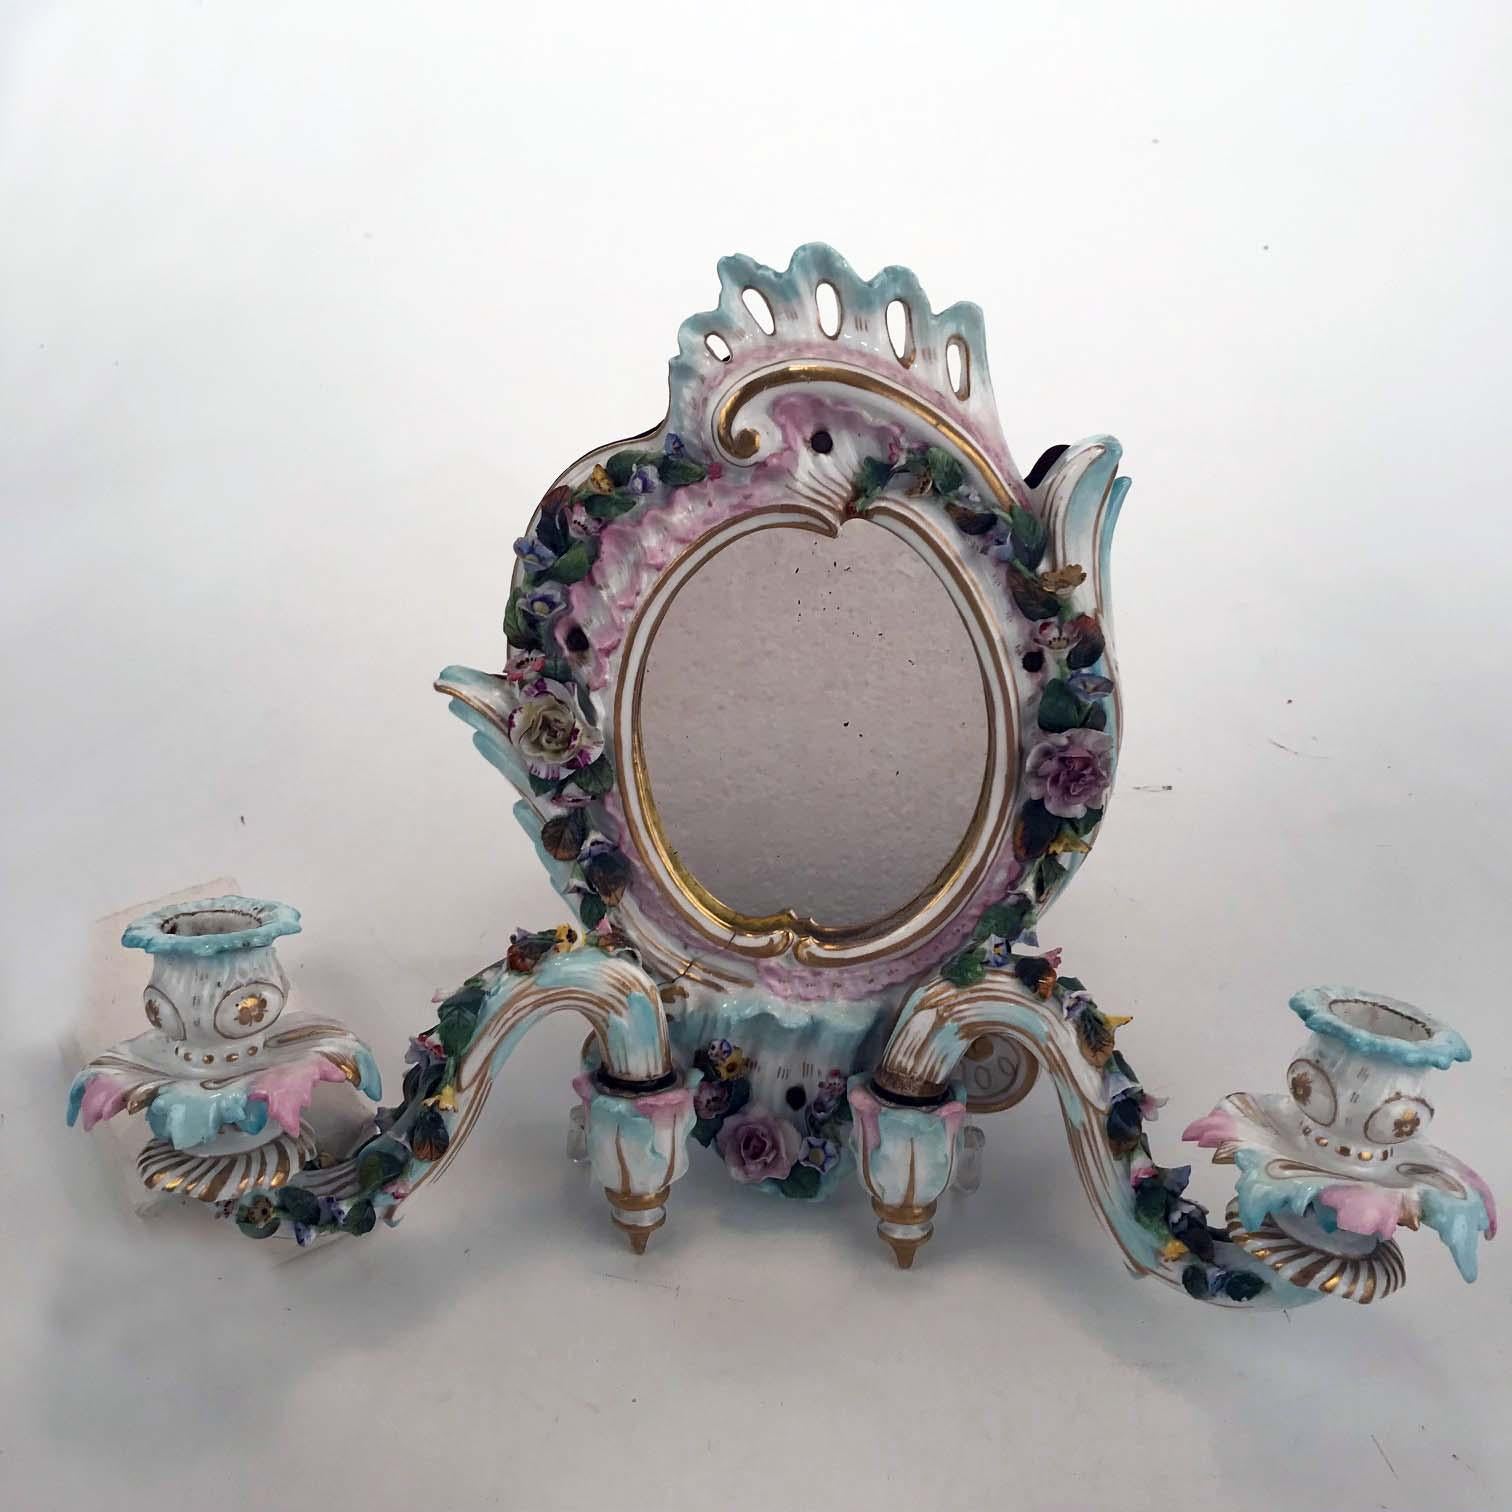 These sconces are highly decorative and desirable and display many of the qualities that make Meissen porcelain so world famous: the skill with which the wild flowers are applied, the subtle shading of the pink and pale green painting, the carefully